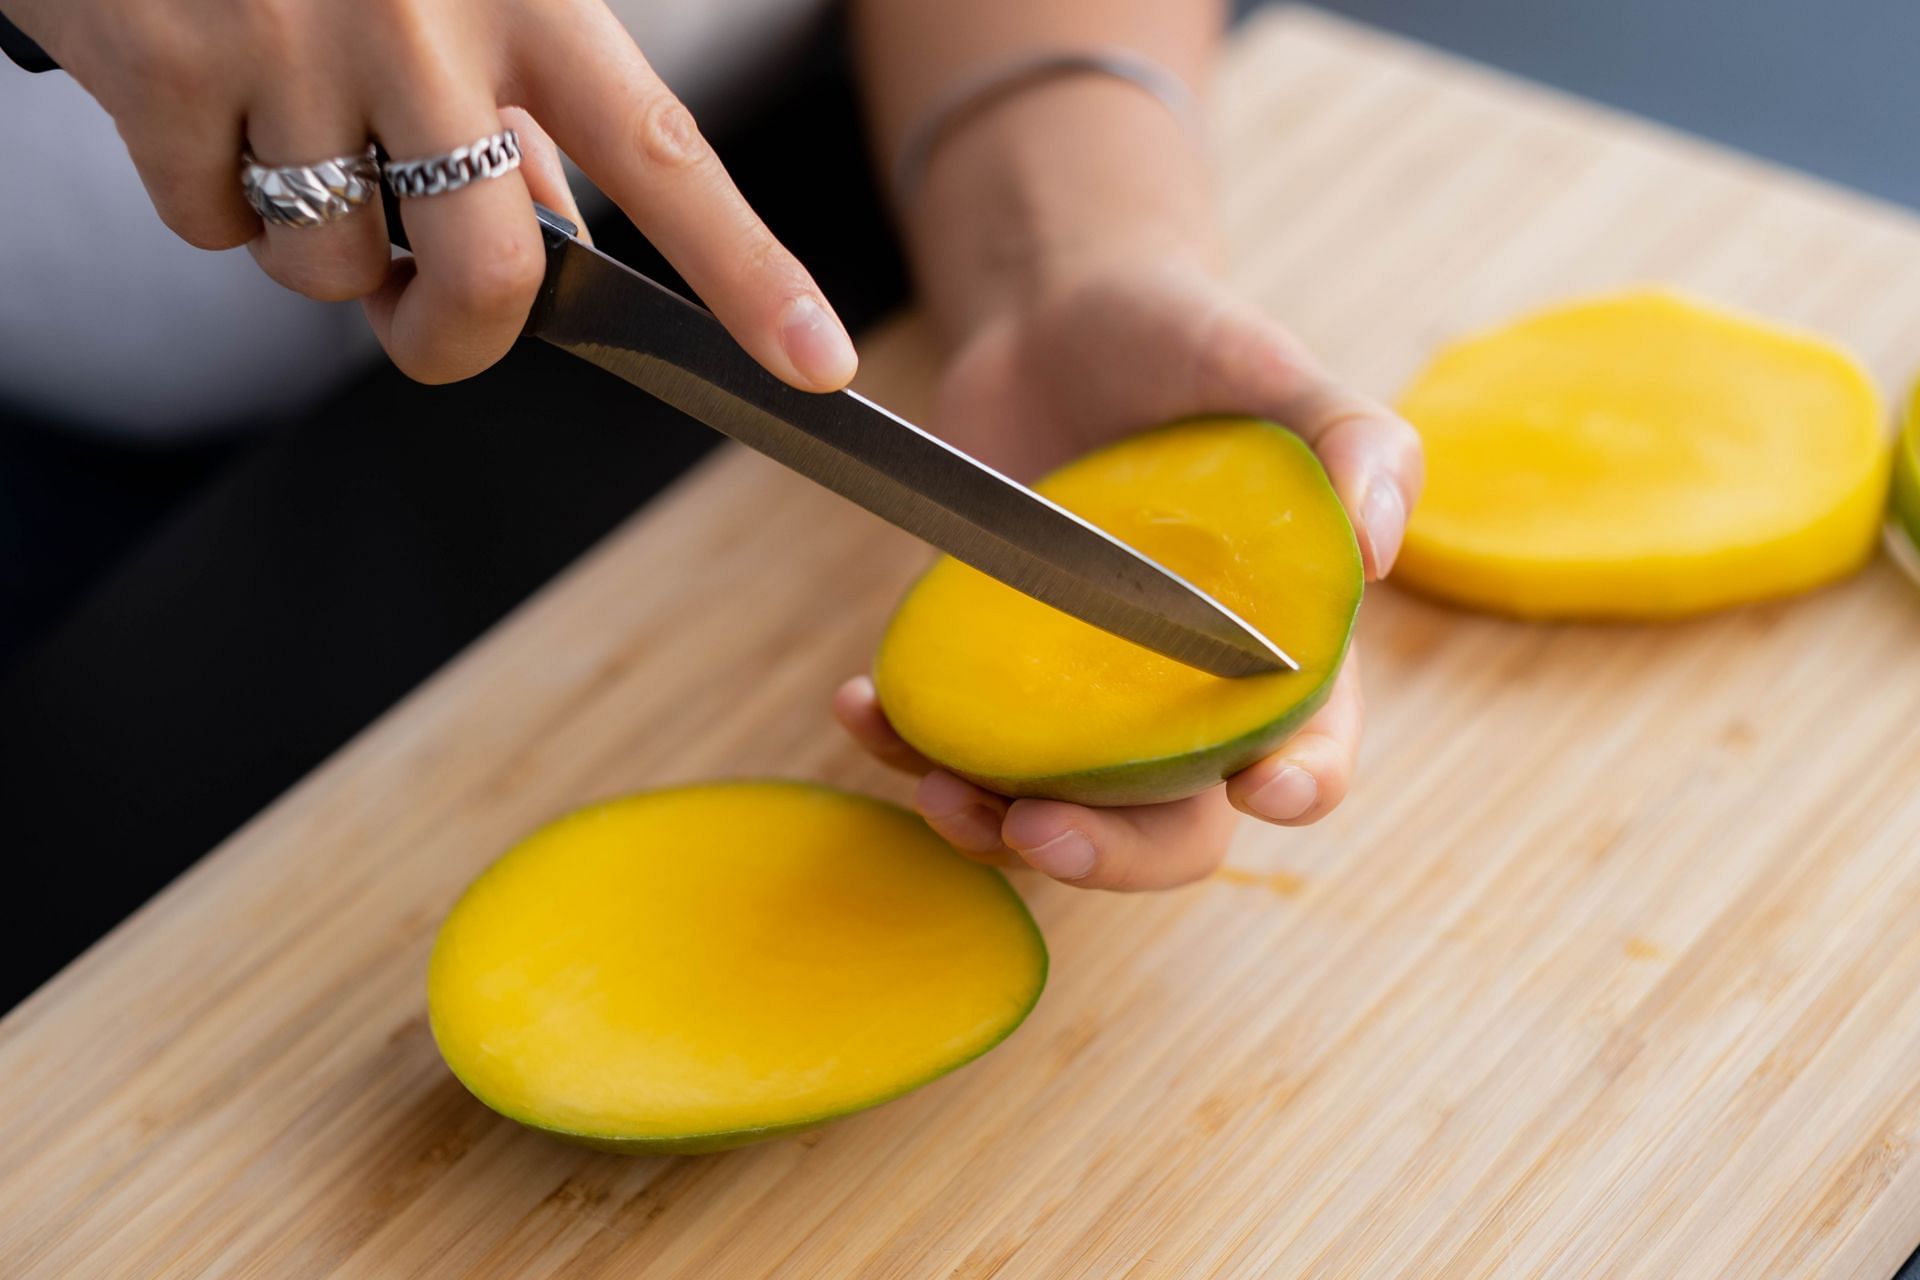 African mango seeds include a variety of vitamins and minerals. (Image via Pexels/Ron Lach)